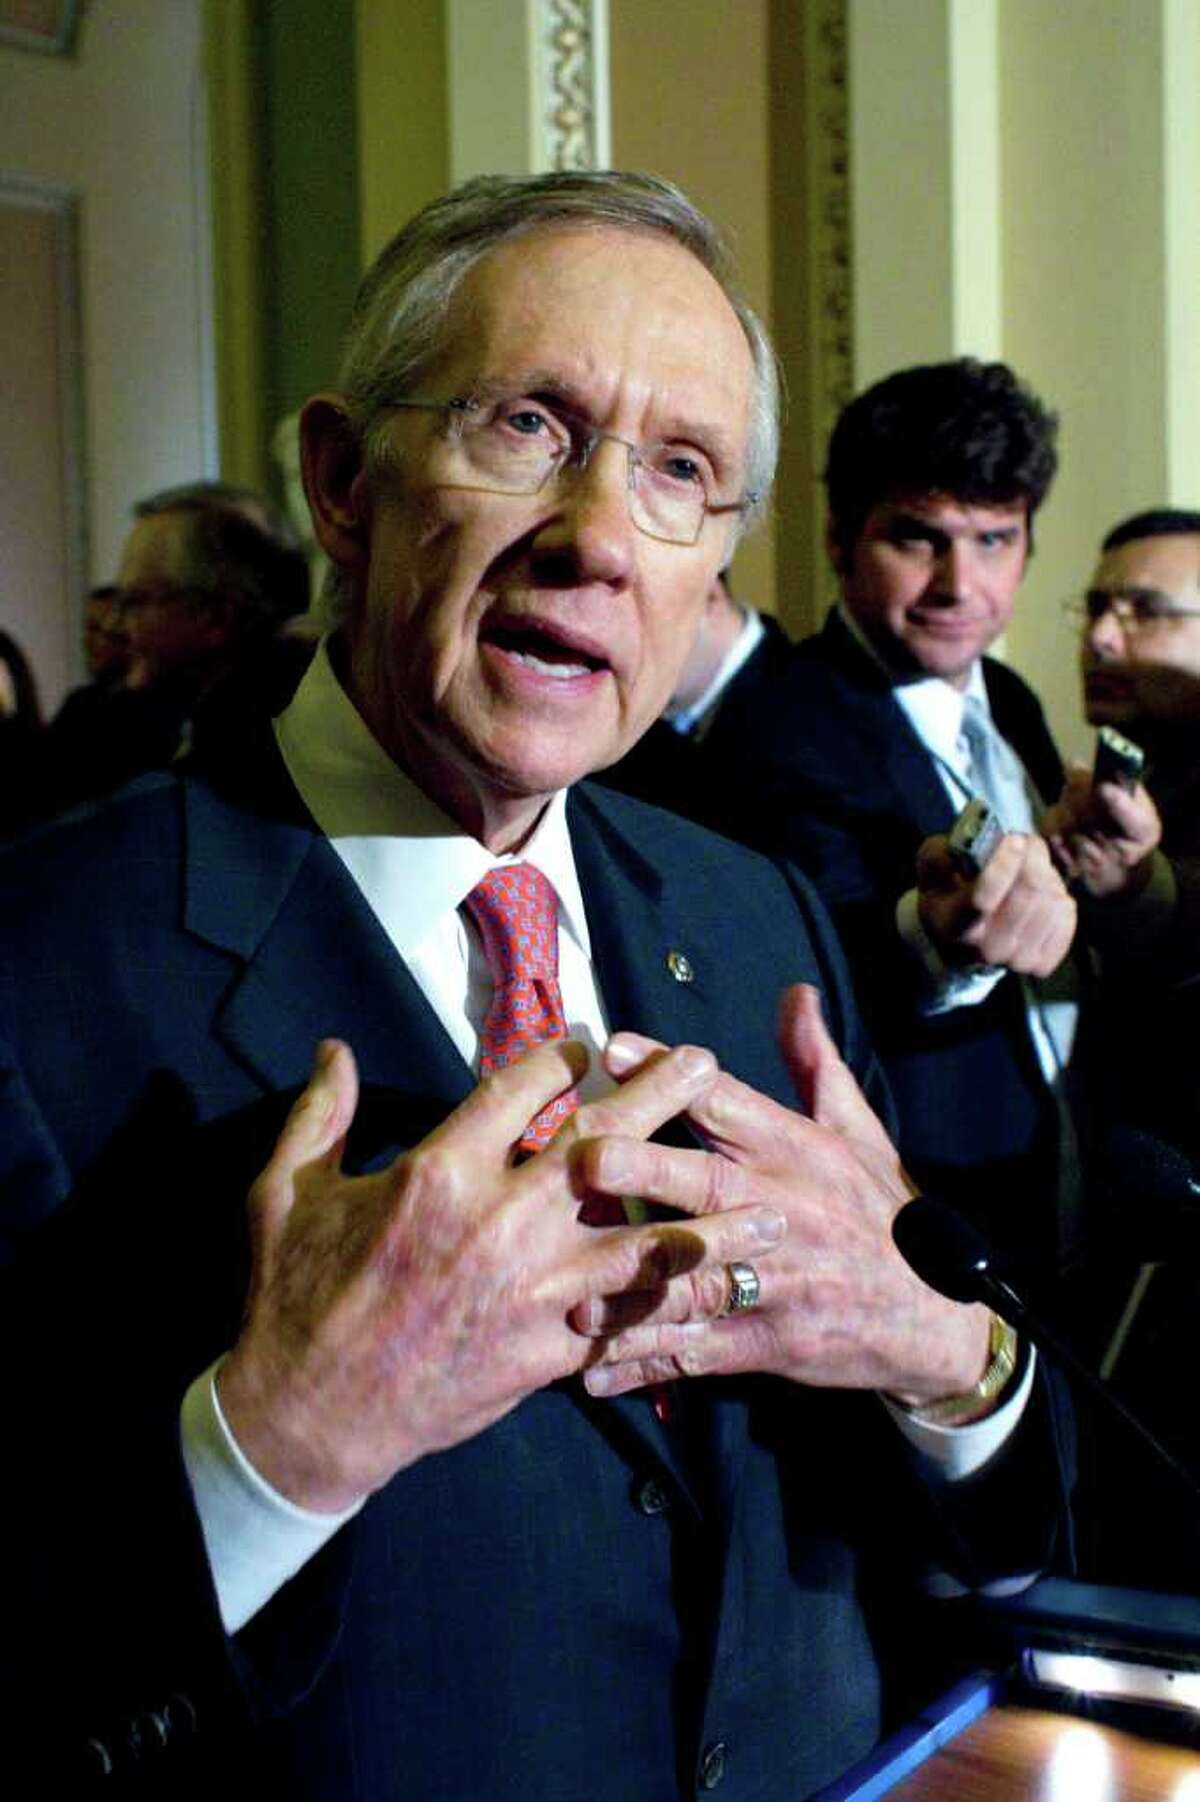 Senate Majority Leader Harry Reid, D-Nev., speaks to reporters after the weekly caucus luncheons on Capitol Hill in Washington, Jan. 25, 2011. (AP Photo/Harry Hamburg)